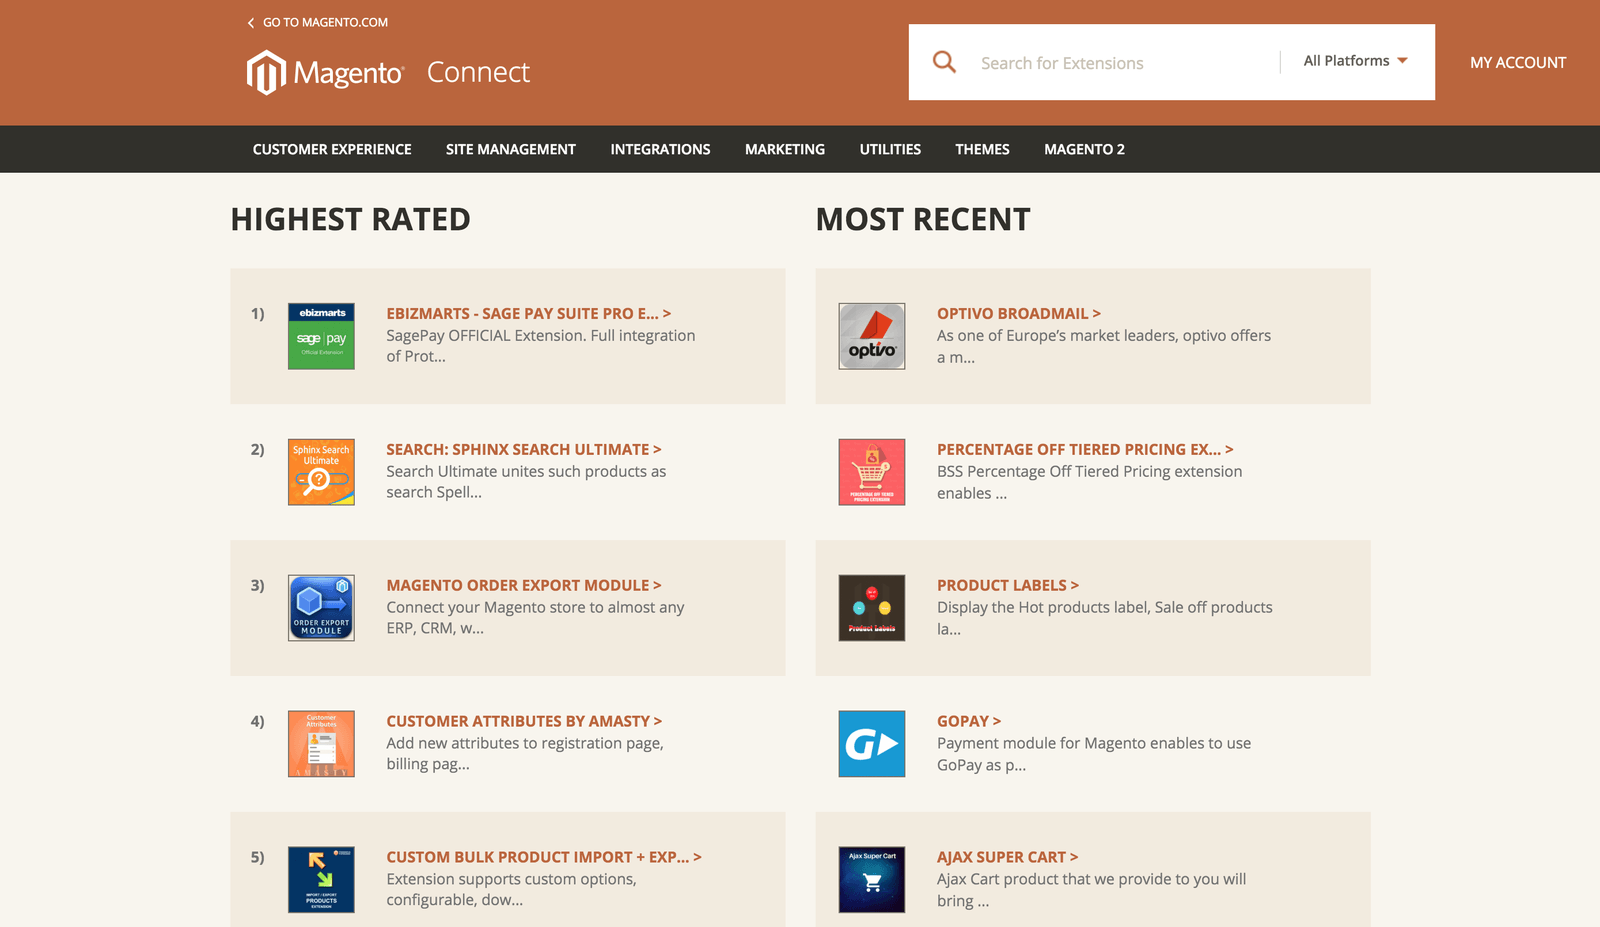 Our search extension is the second on the list of the highest-rated extensions through  entire Magento Connect